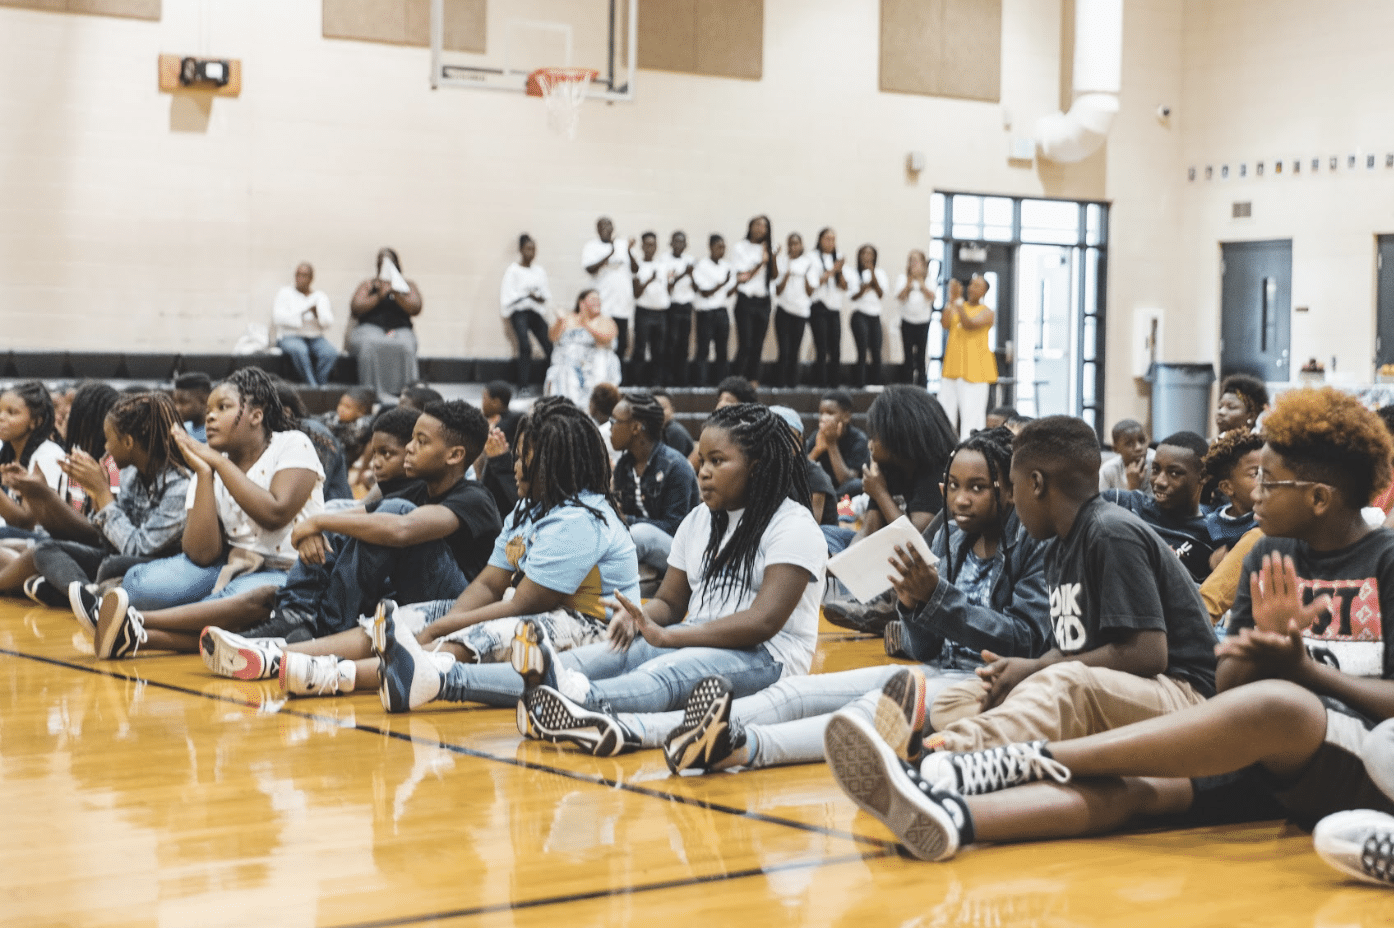 BCBS Be Healthy 4 Green Acres Middle School in Birmingham utilizing $10,000 grant from Blue Cross and Blue Shield of Alabama for 6th grade health programs